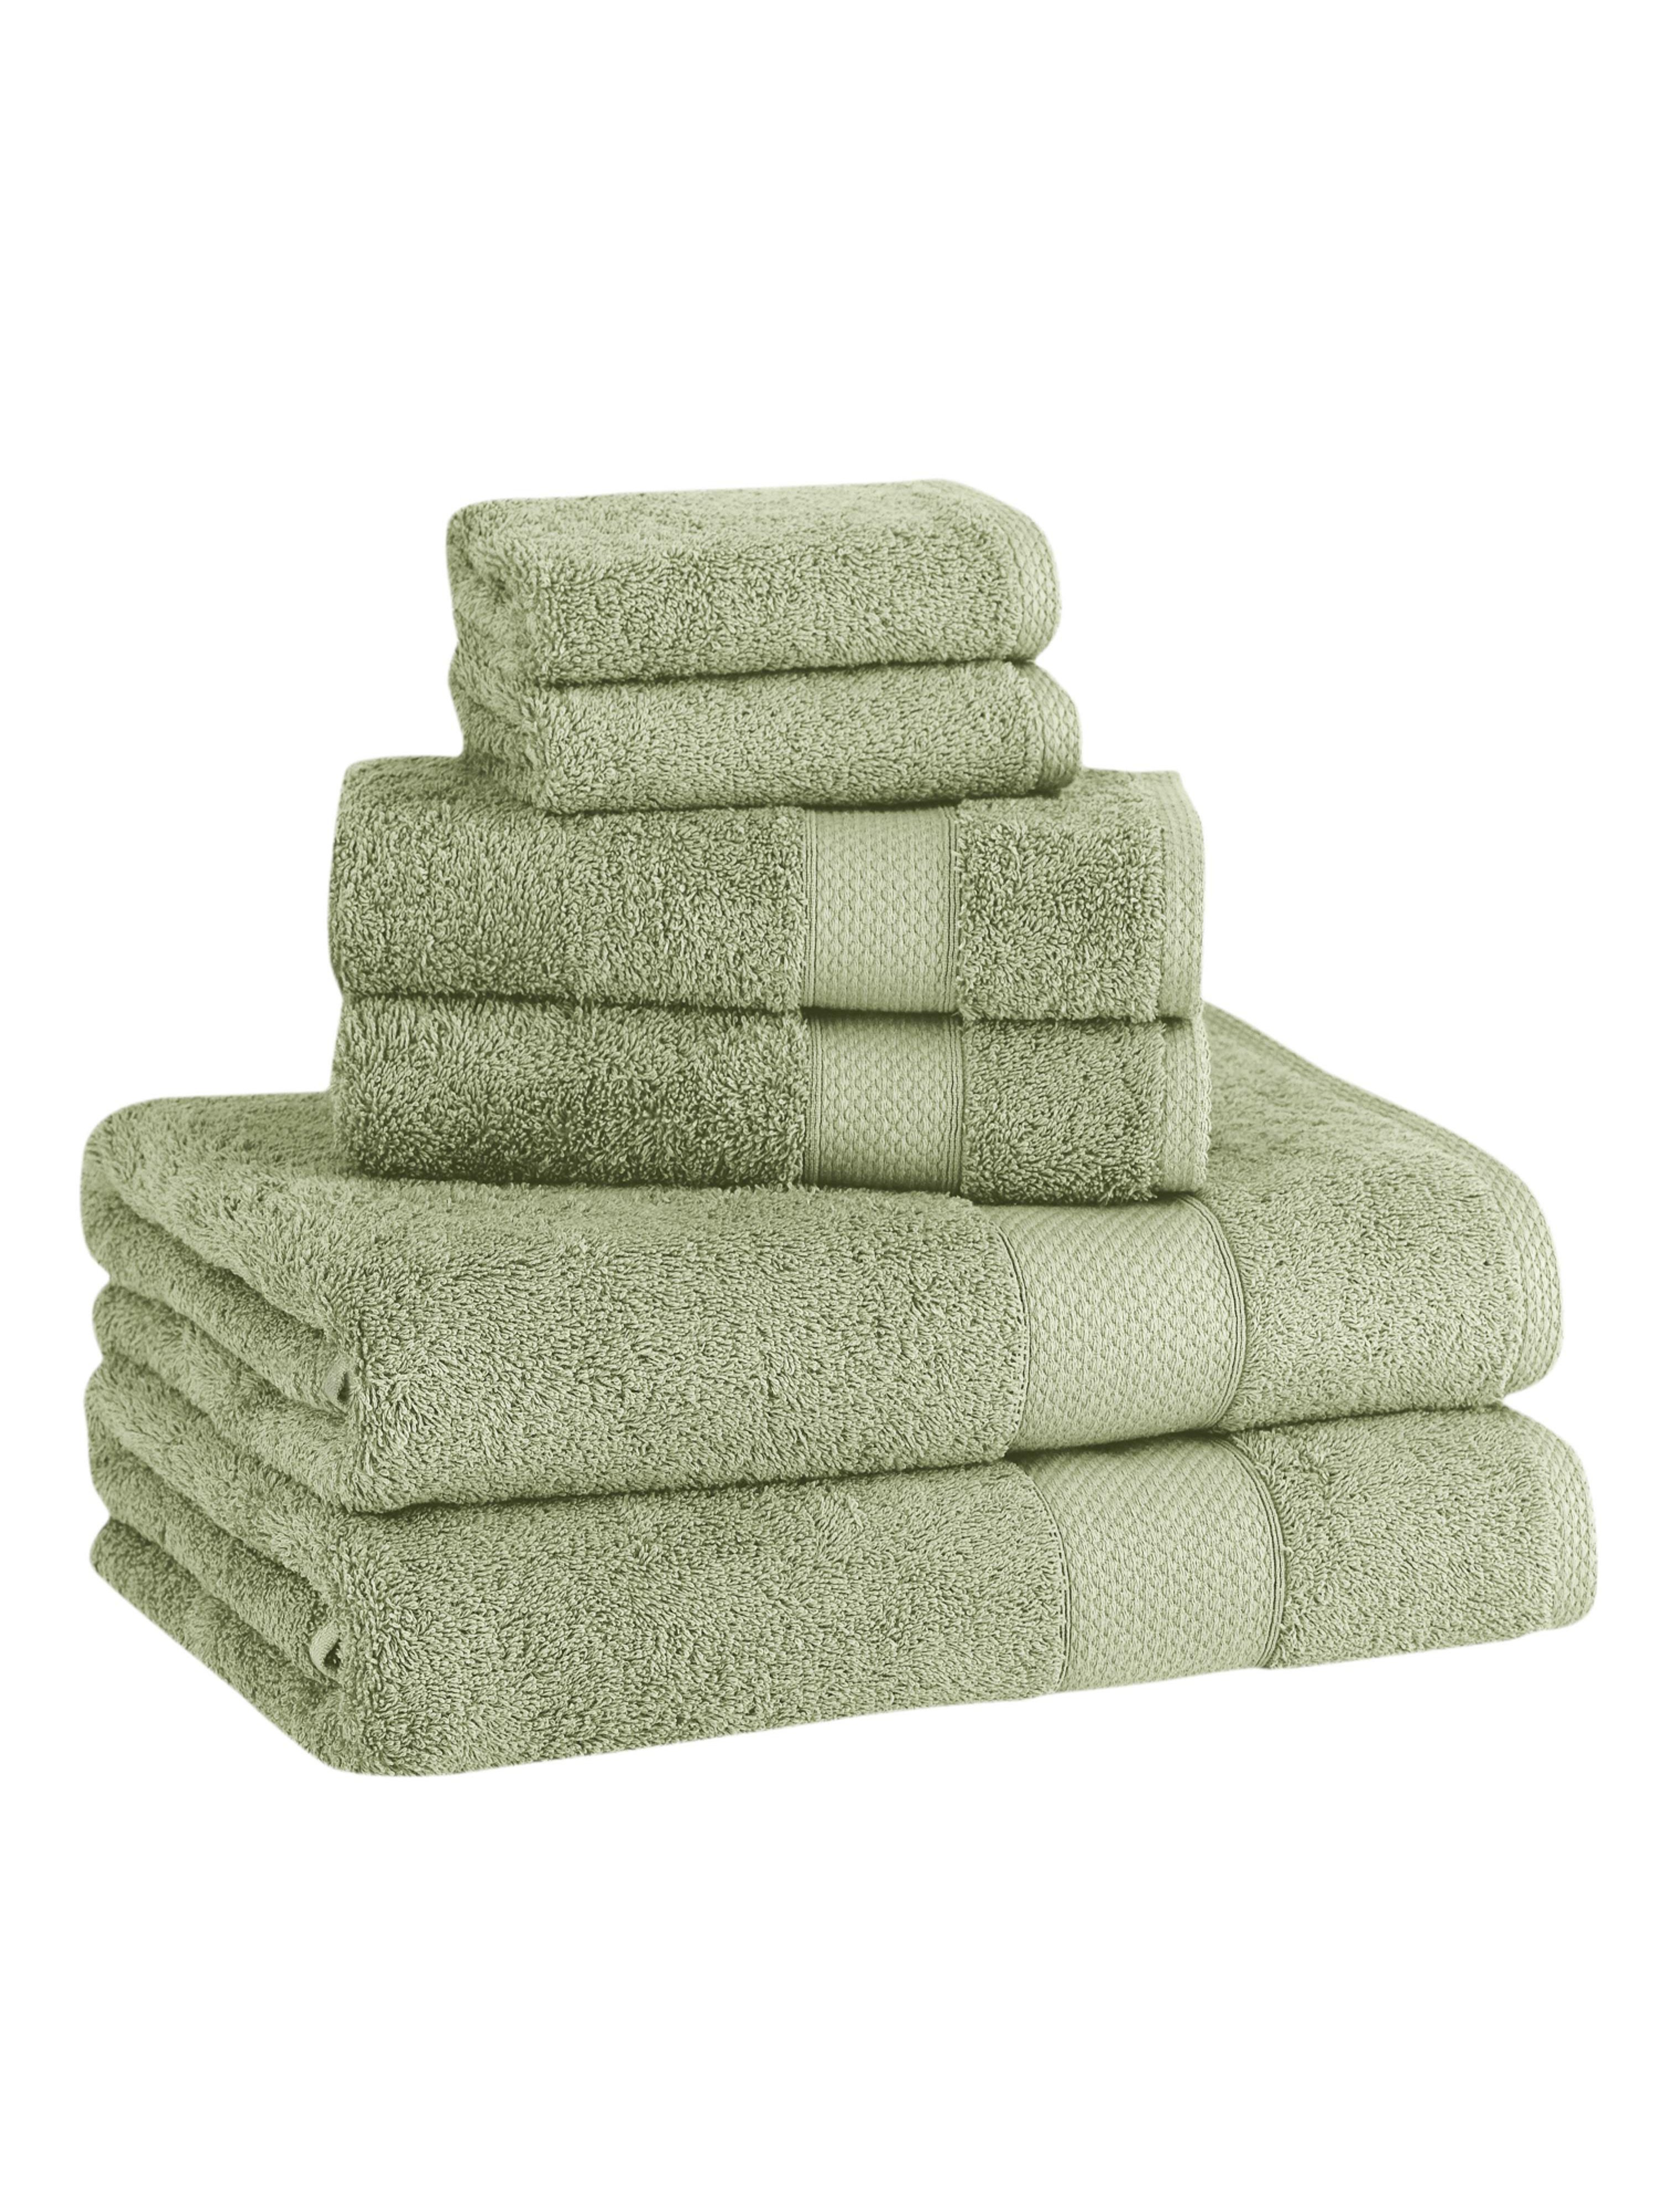 Classic Turkish Towels Luxury Madison Turkish Towels Set Of 6-piece Plush And Thick In Green